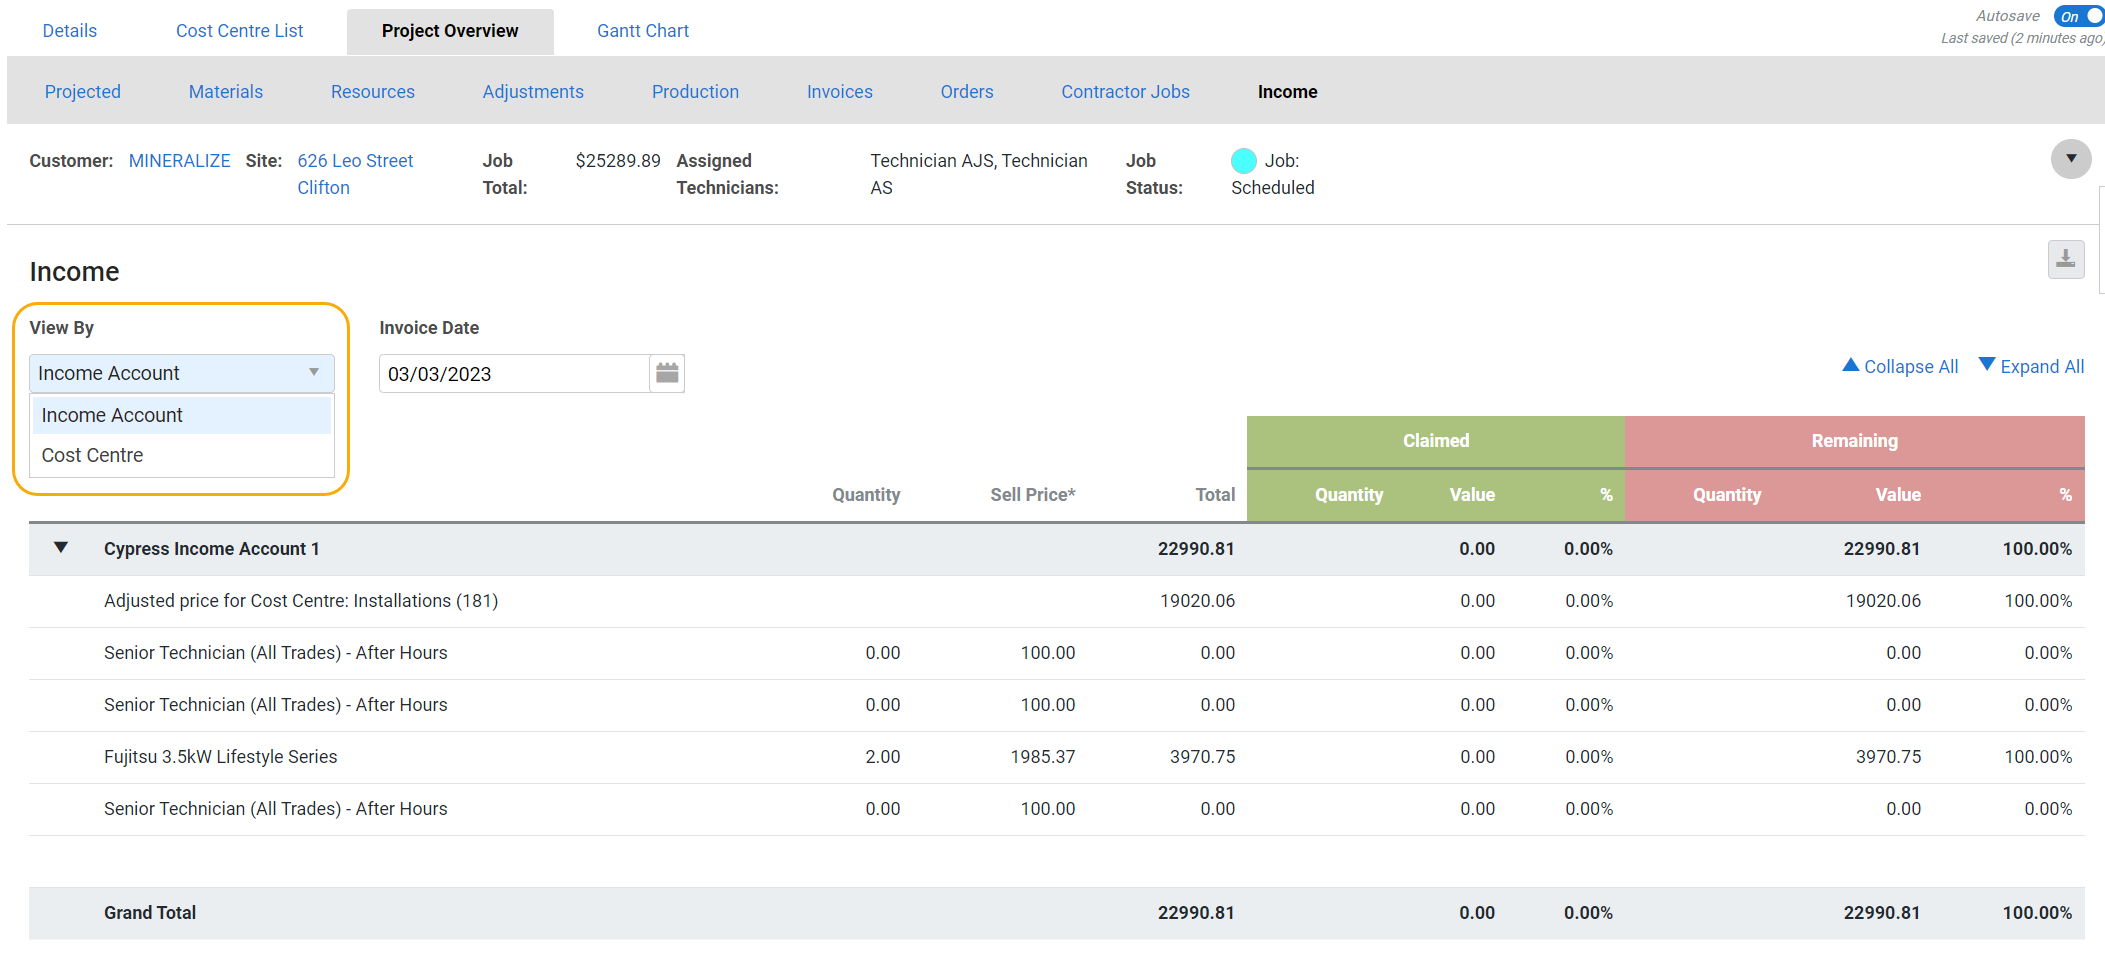 A screenshot of the Income tab in the project overview.